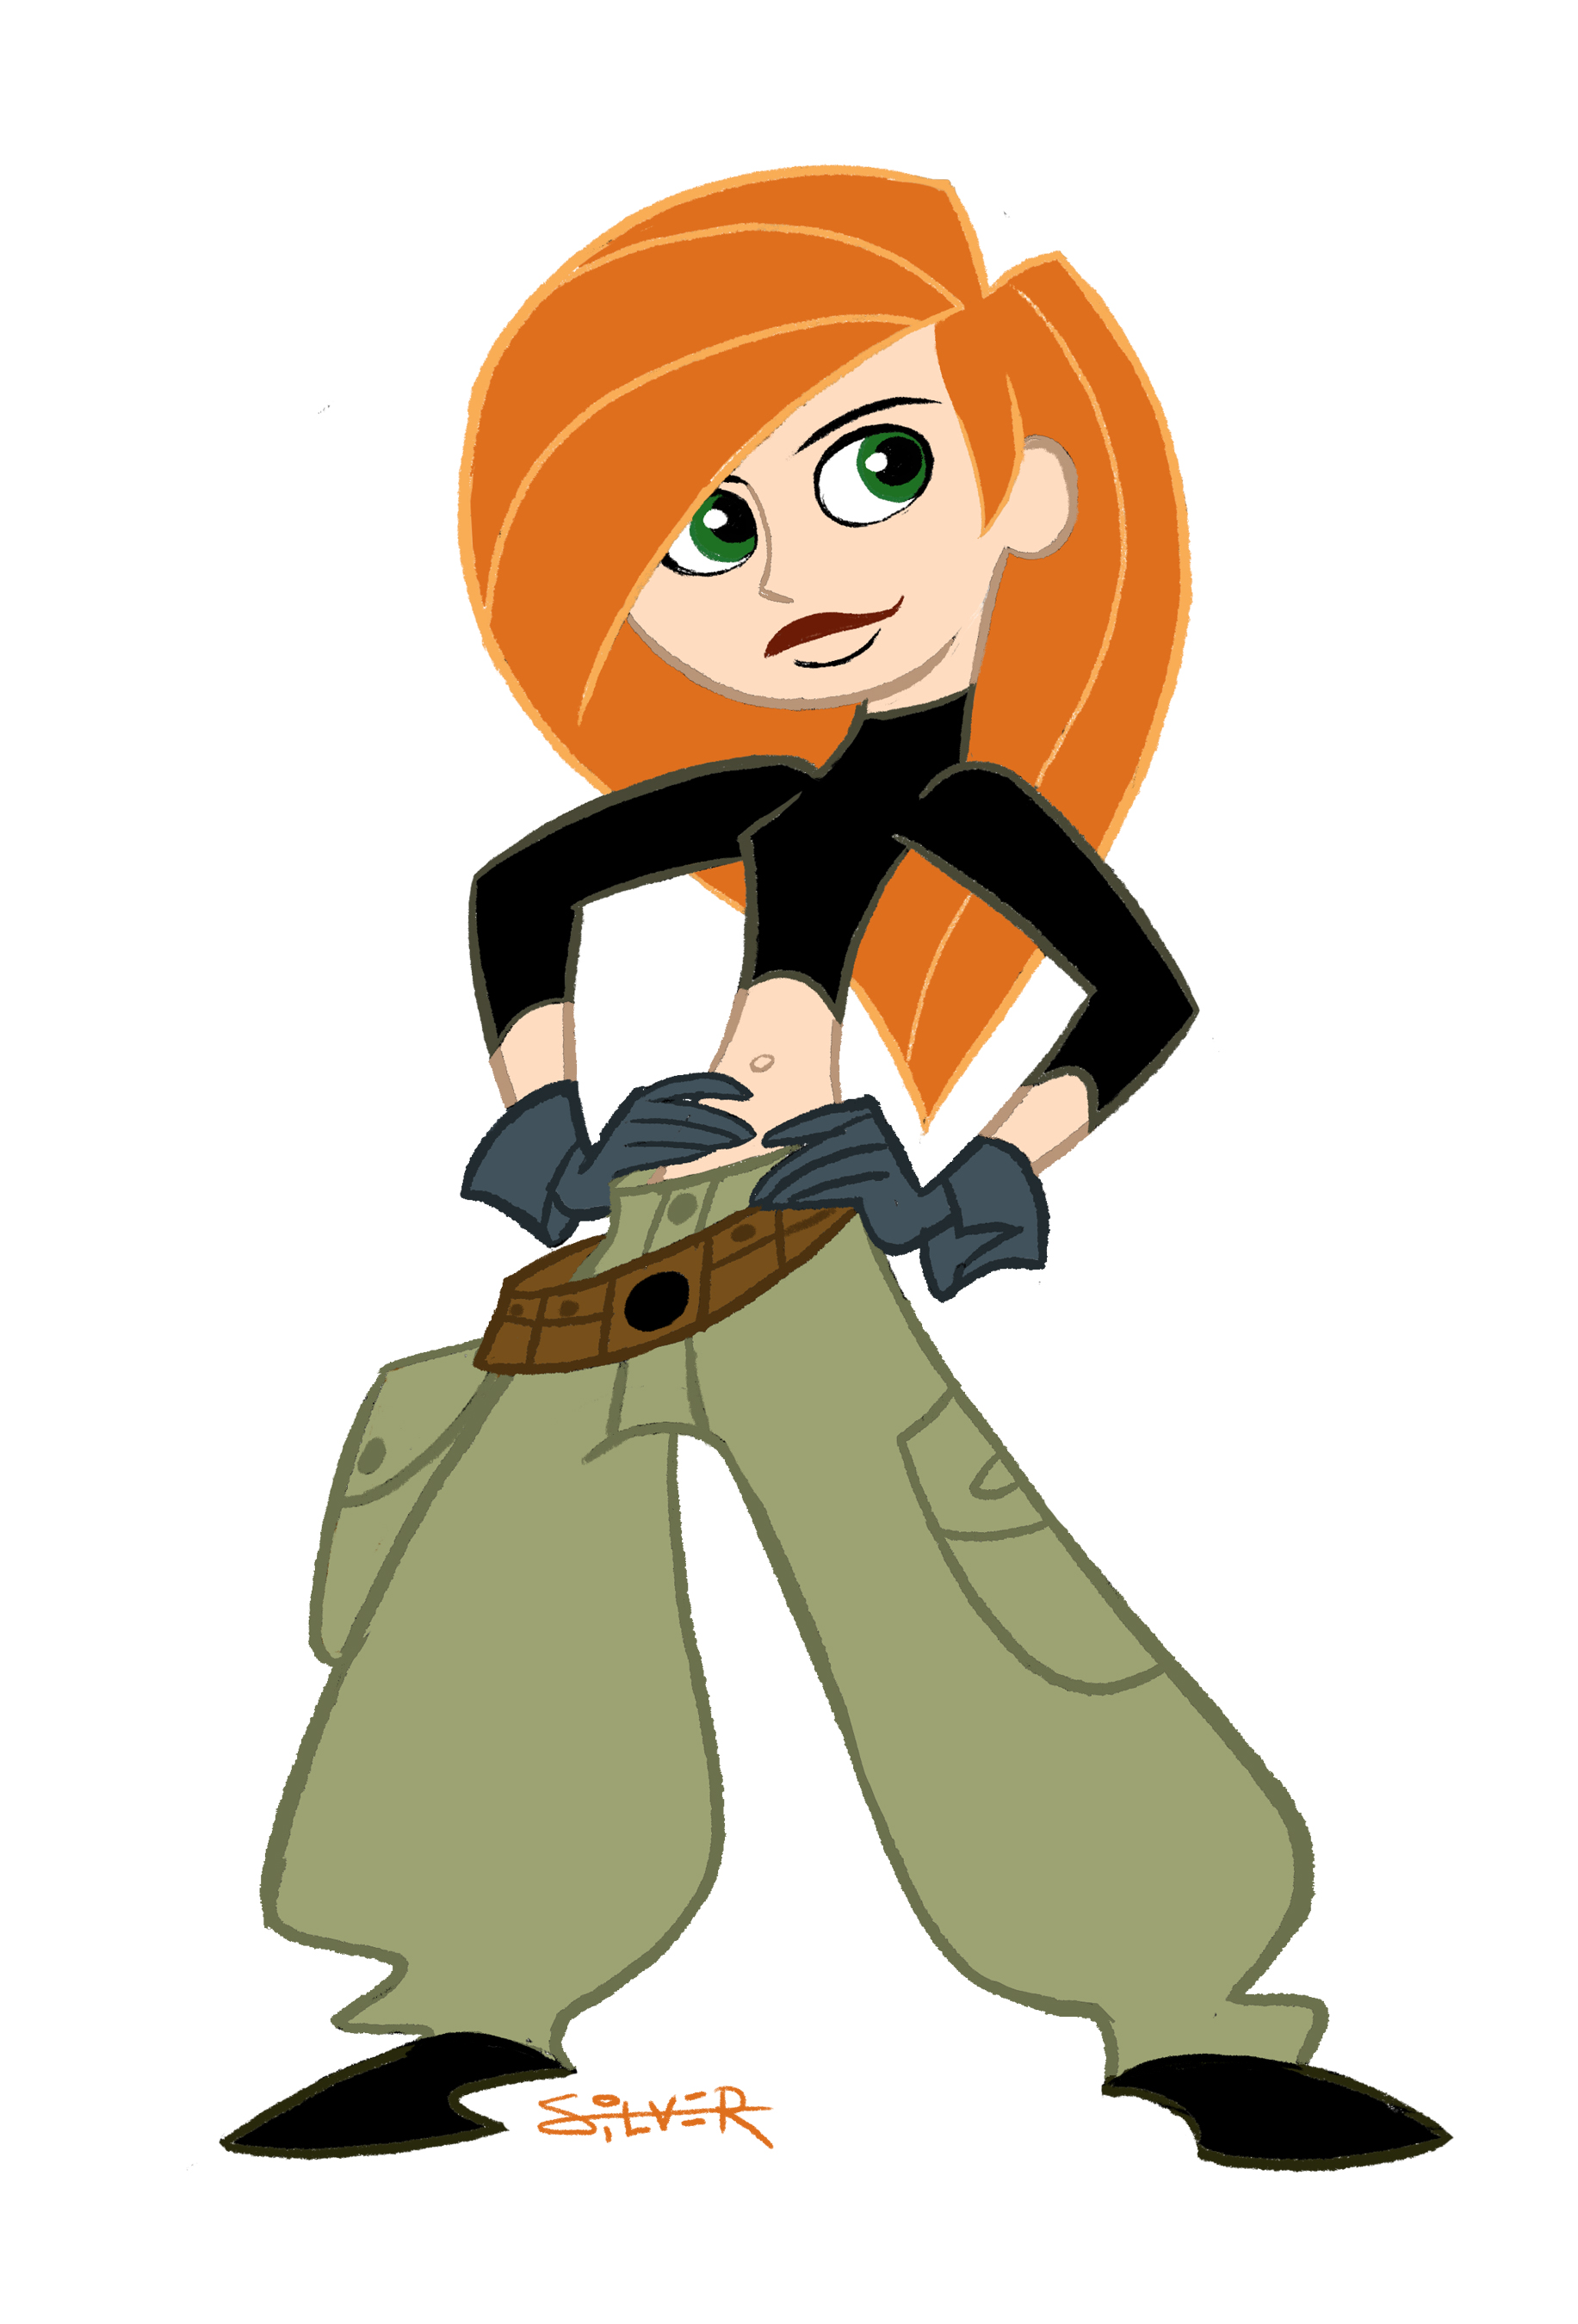 KIM POSSIBLE - At San Diego Comic-Con 2018, Emmy